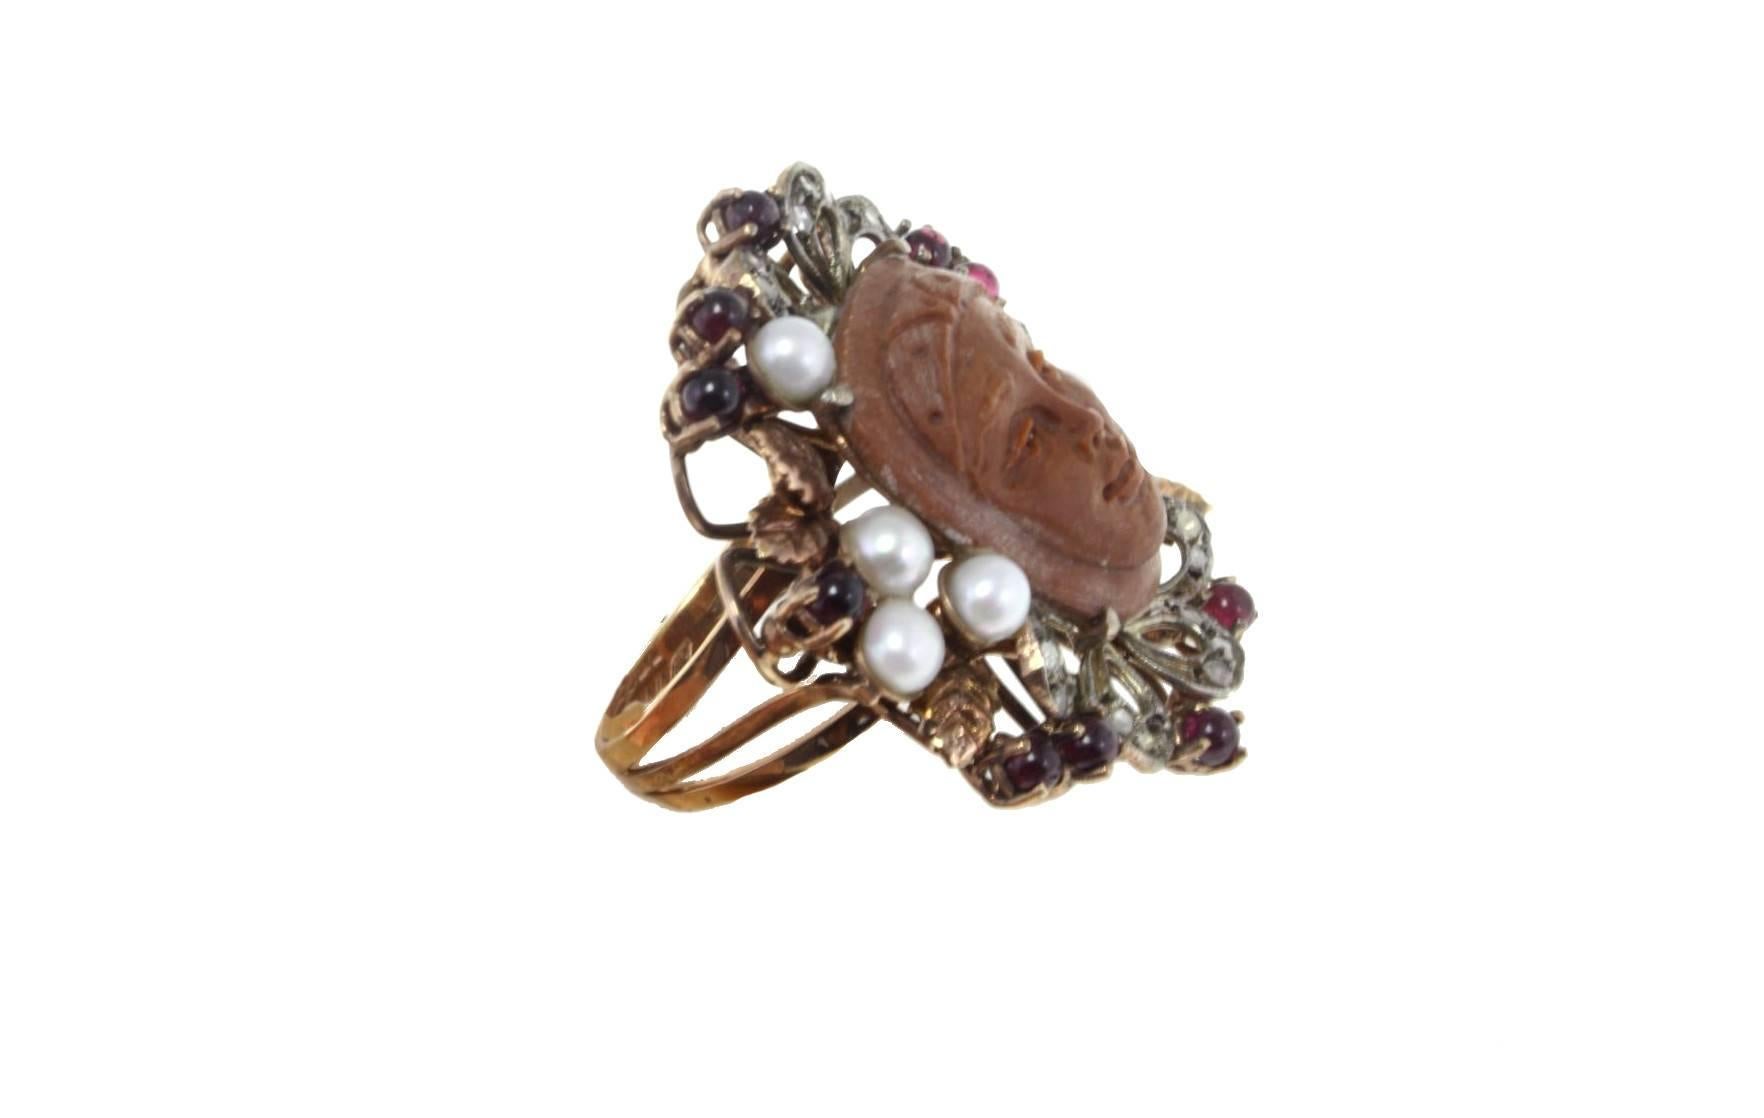 Lava stone cameo ring in 9ky rose gold and silver embellished with a crown of pearls, garnets and diamonds.

tot weight 11.5gr
r.f.  gauc